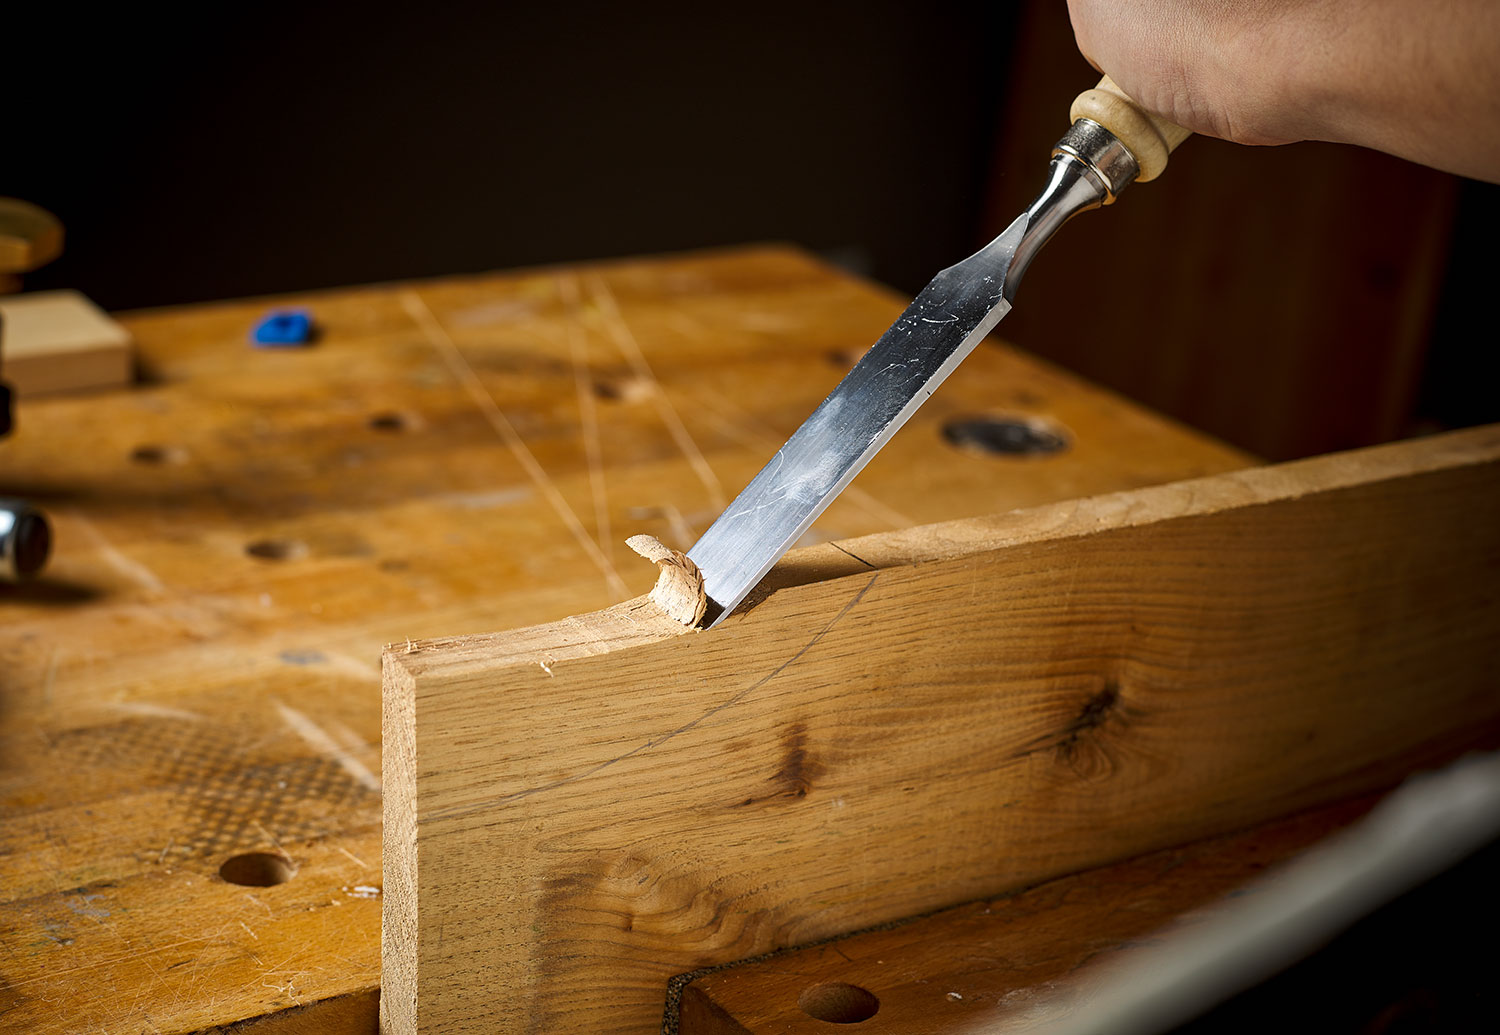 Cutting a concave surface with a chisel and mallet.